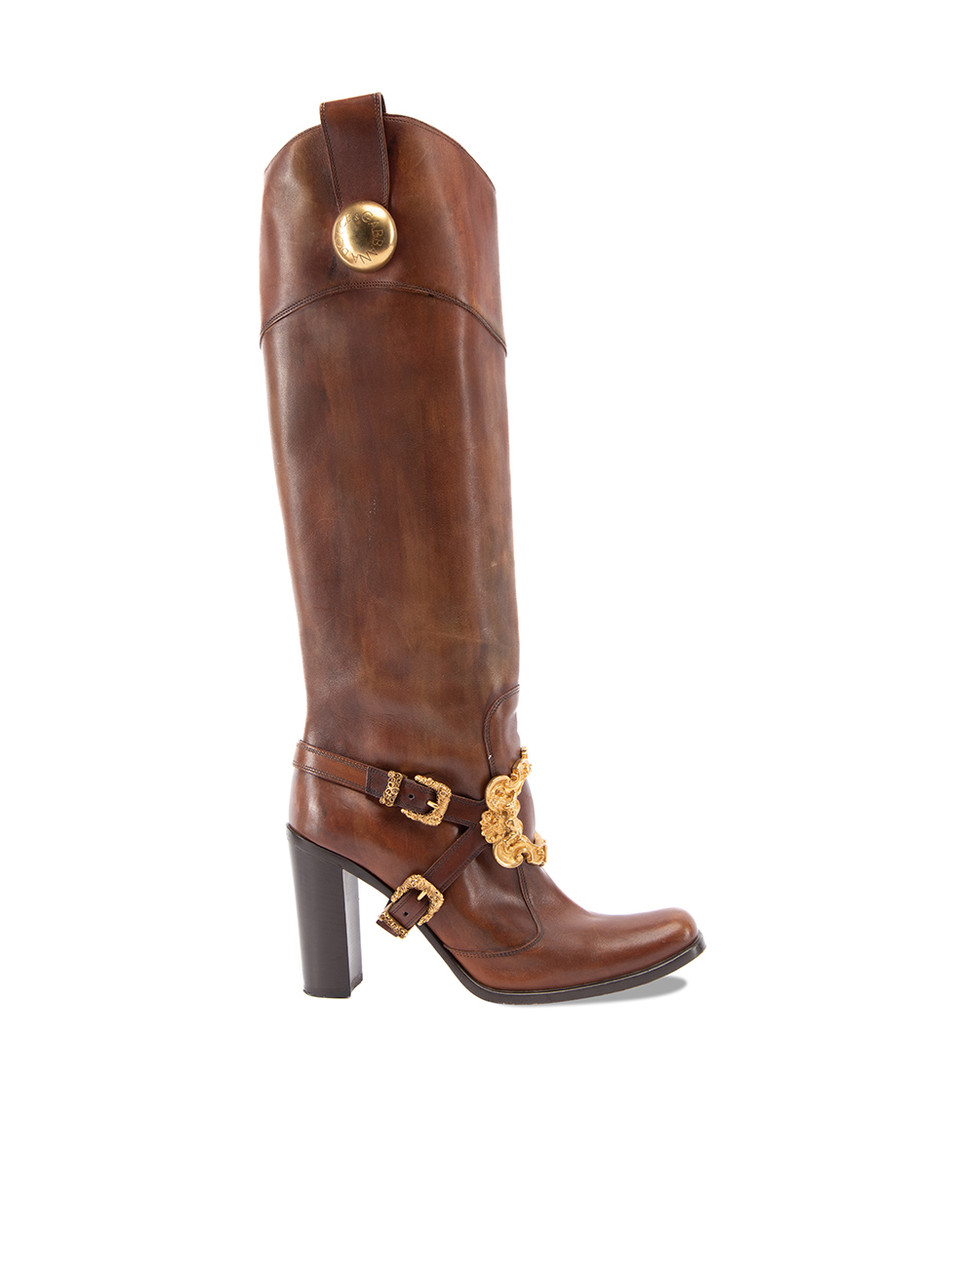 Image of Brown Buckle Accent Knee High Cowboy Boots